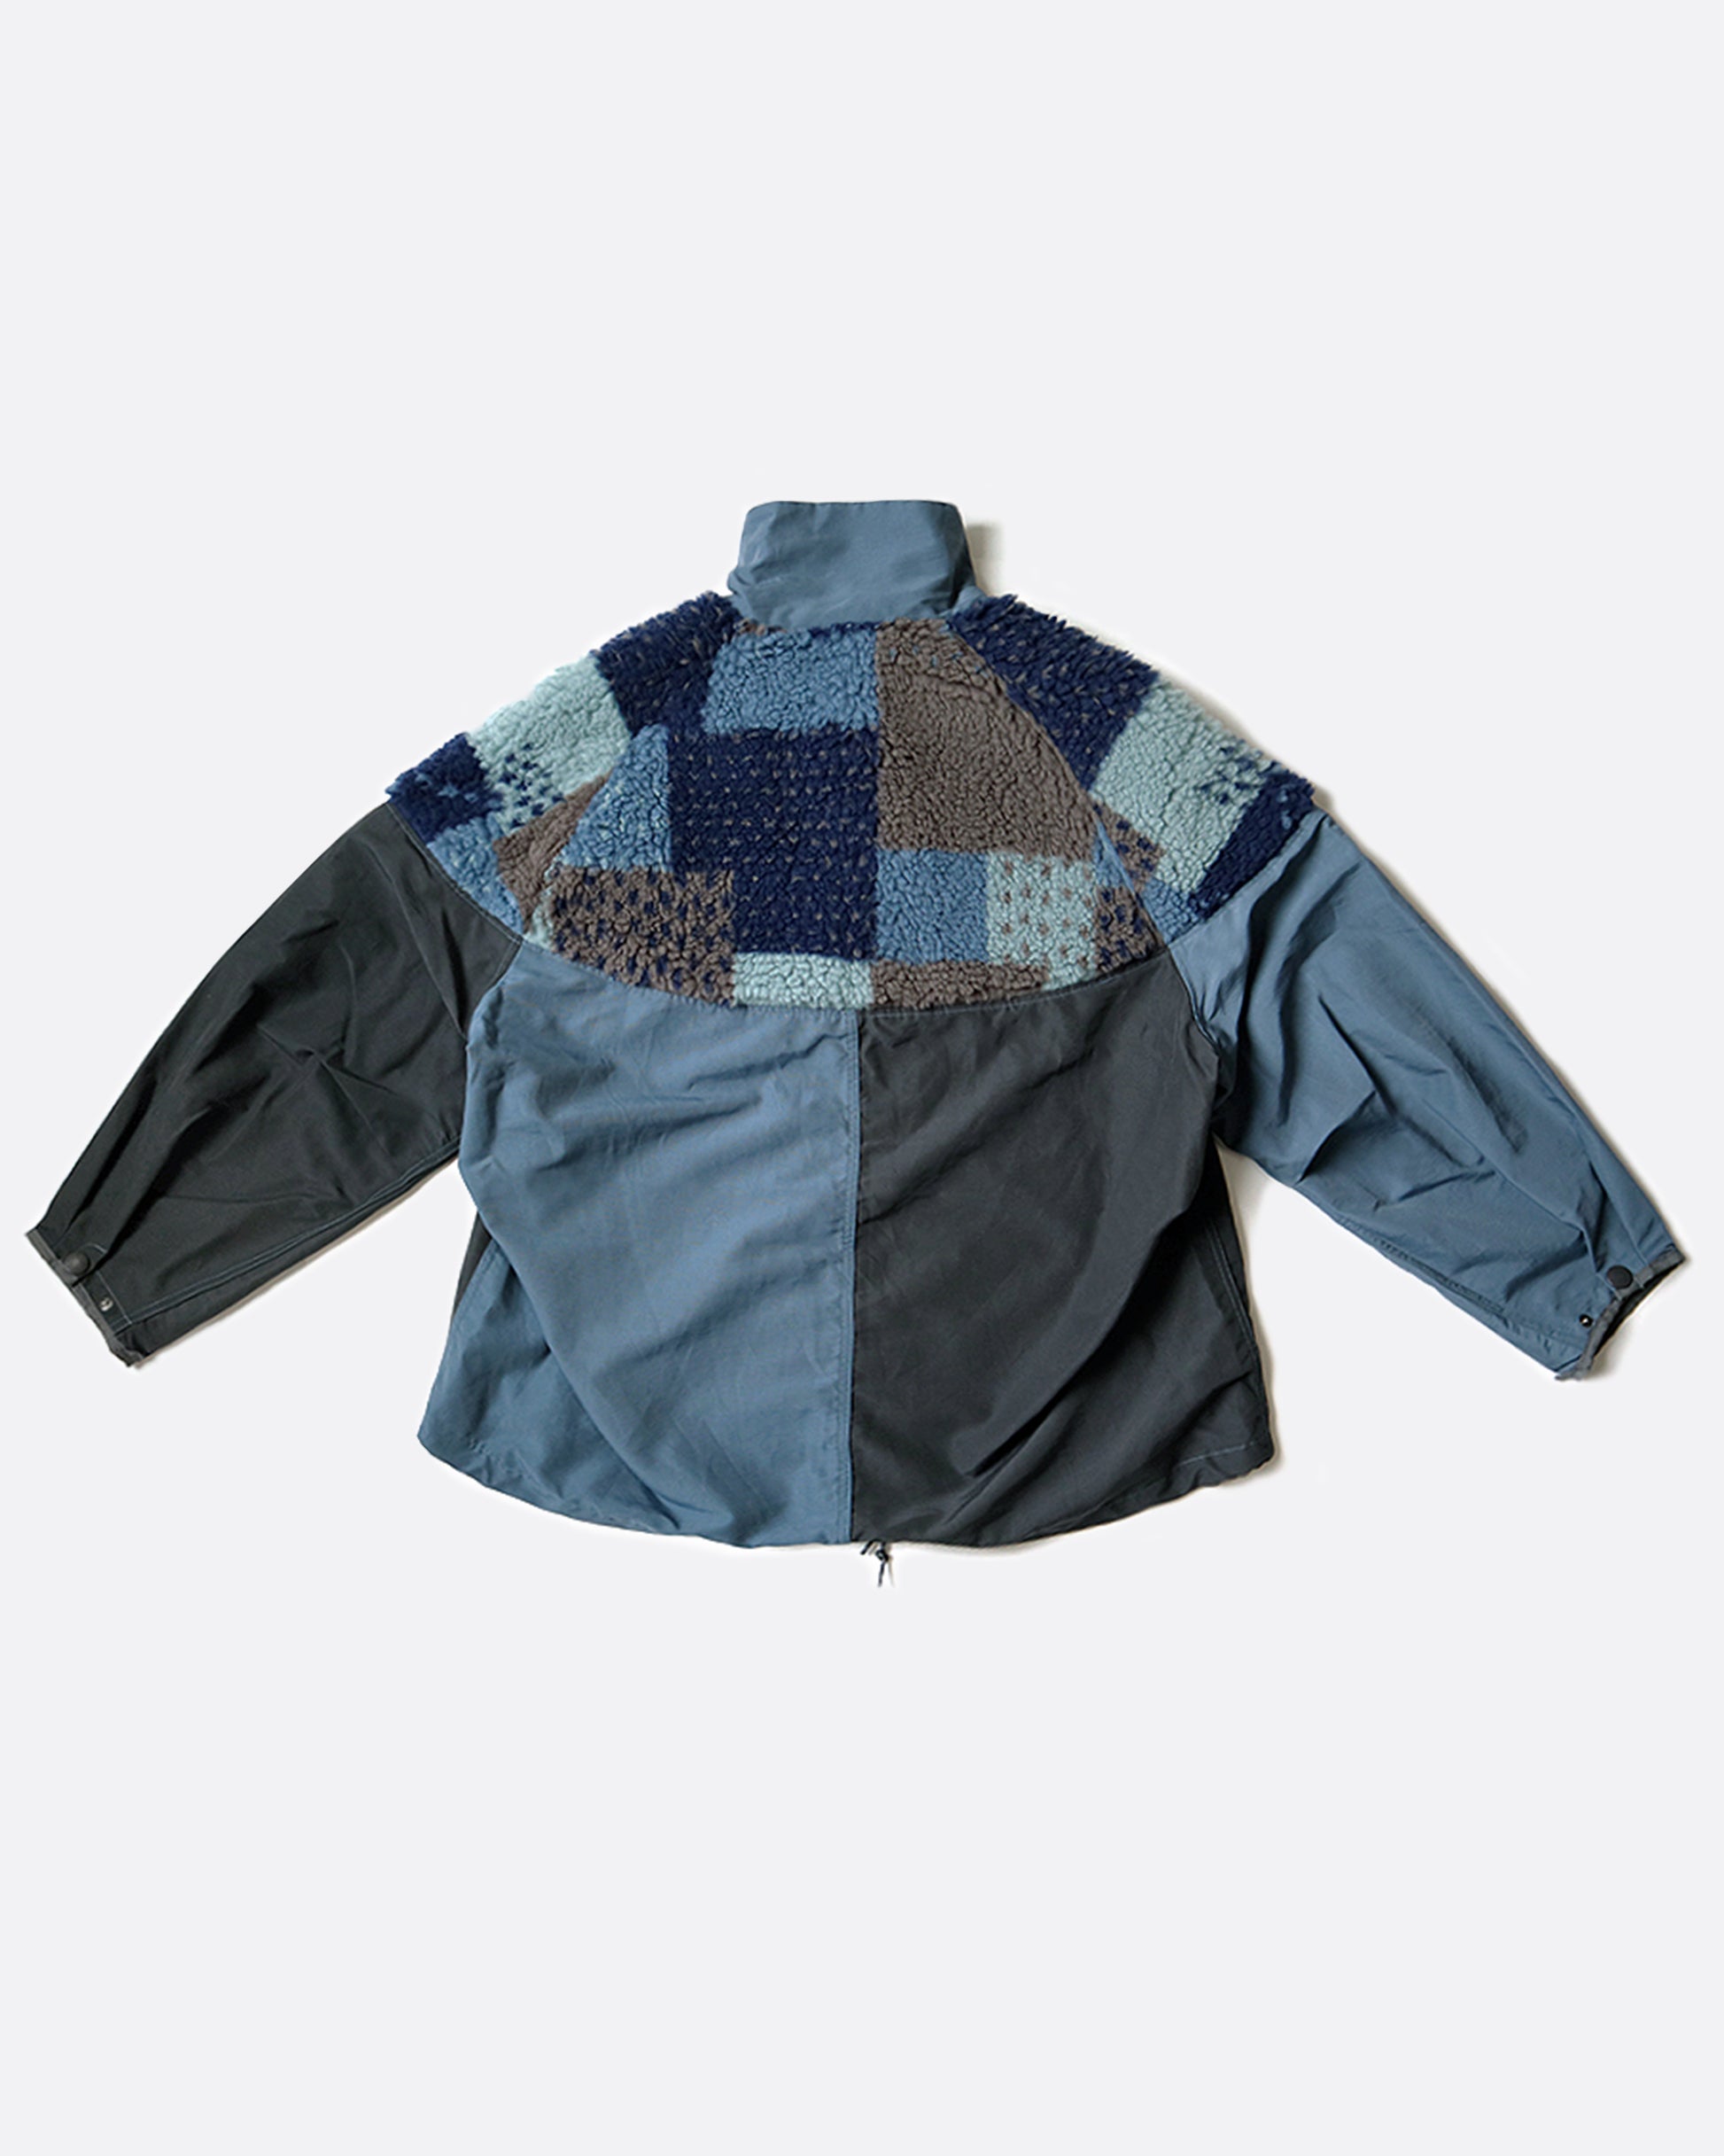 A pullover anorak with a half zip. Half blue and half gray with patchwork fleece around the shoulders. Shown laying flat from the back.